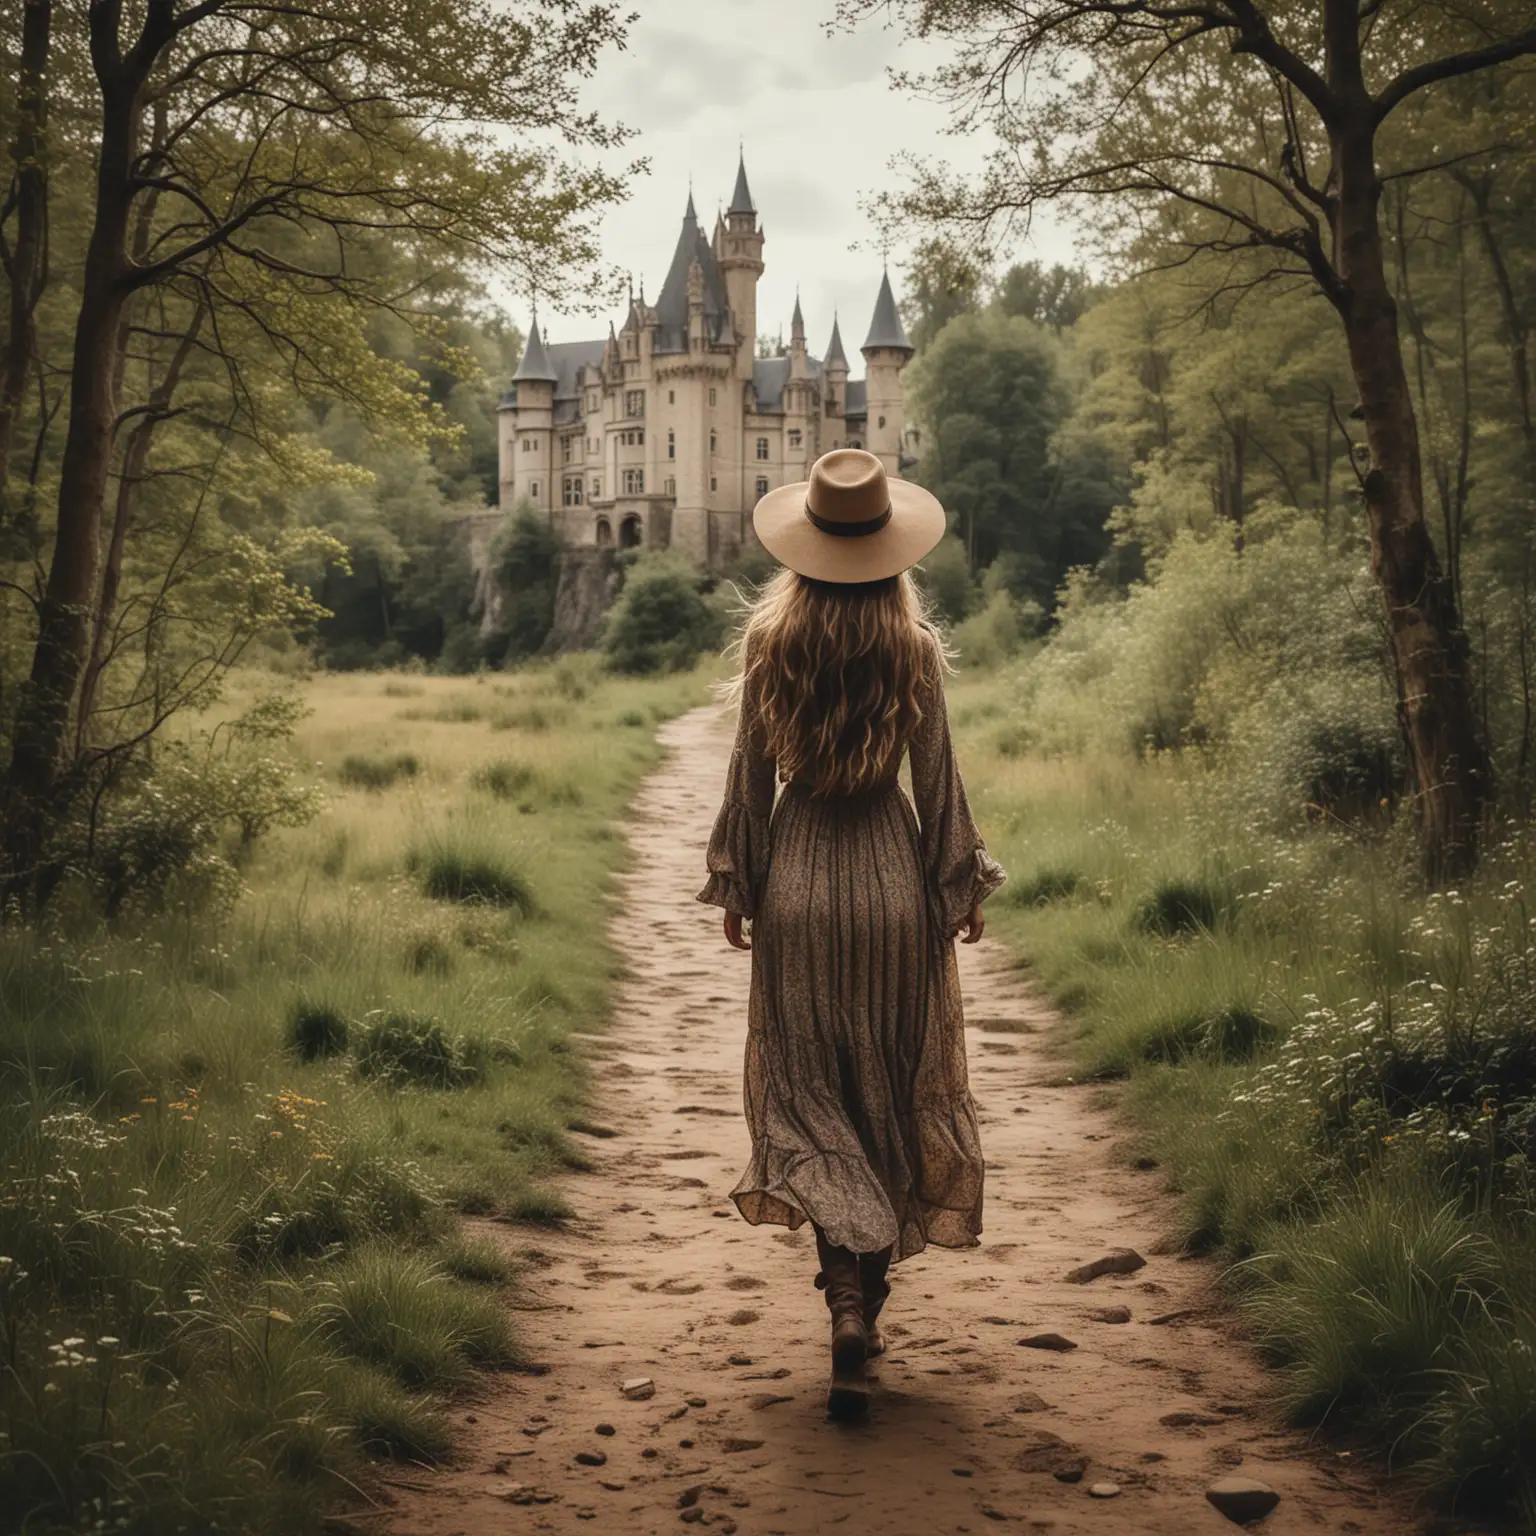 Bohemian Girl Walking to Majestic Castle Through Rustic Forest